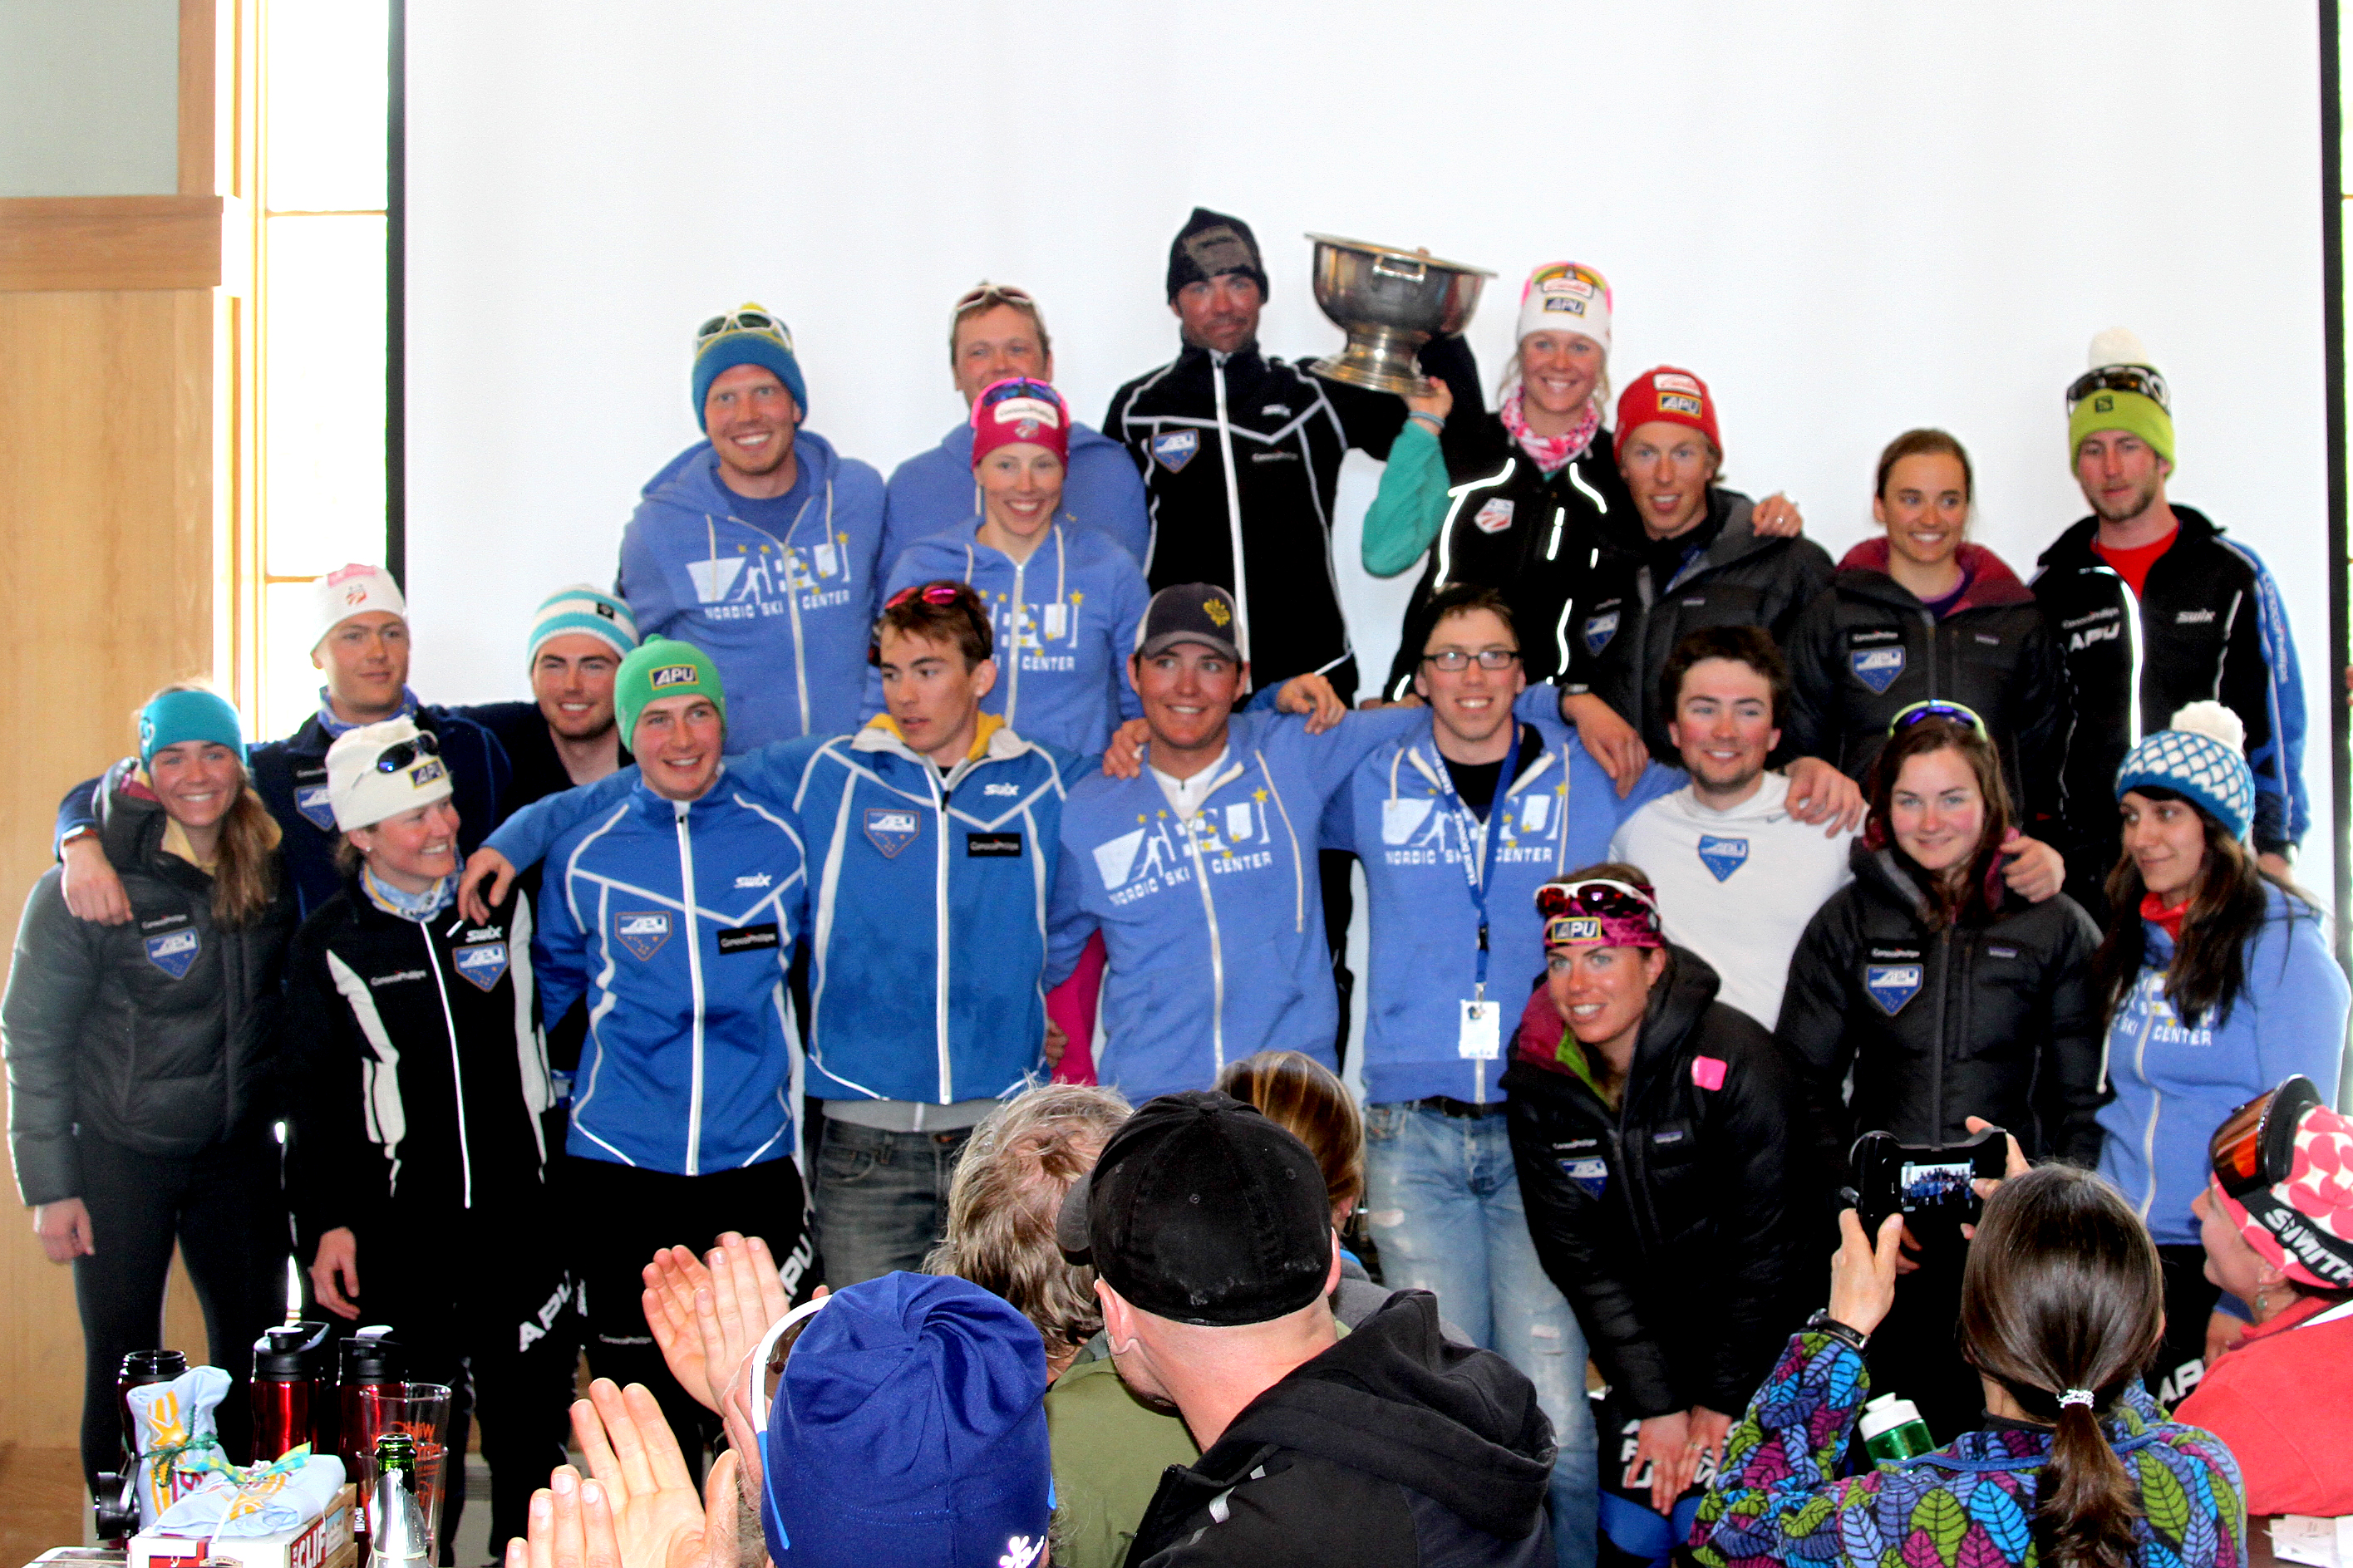 APU with its 2013 NNF Cup awarded on the last day of SuperTour Finals in Truckee, Calif. (Photo: Mark Nadell/MacBeth Graphics)